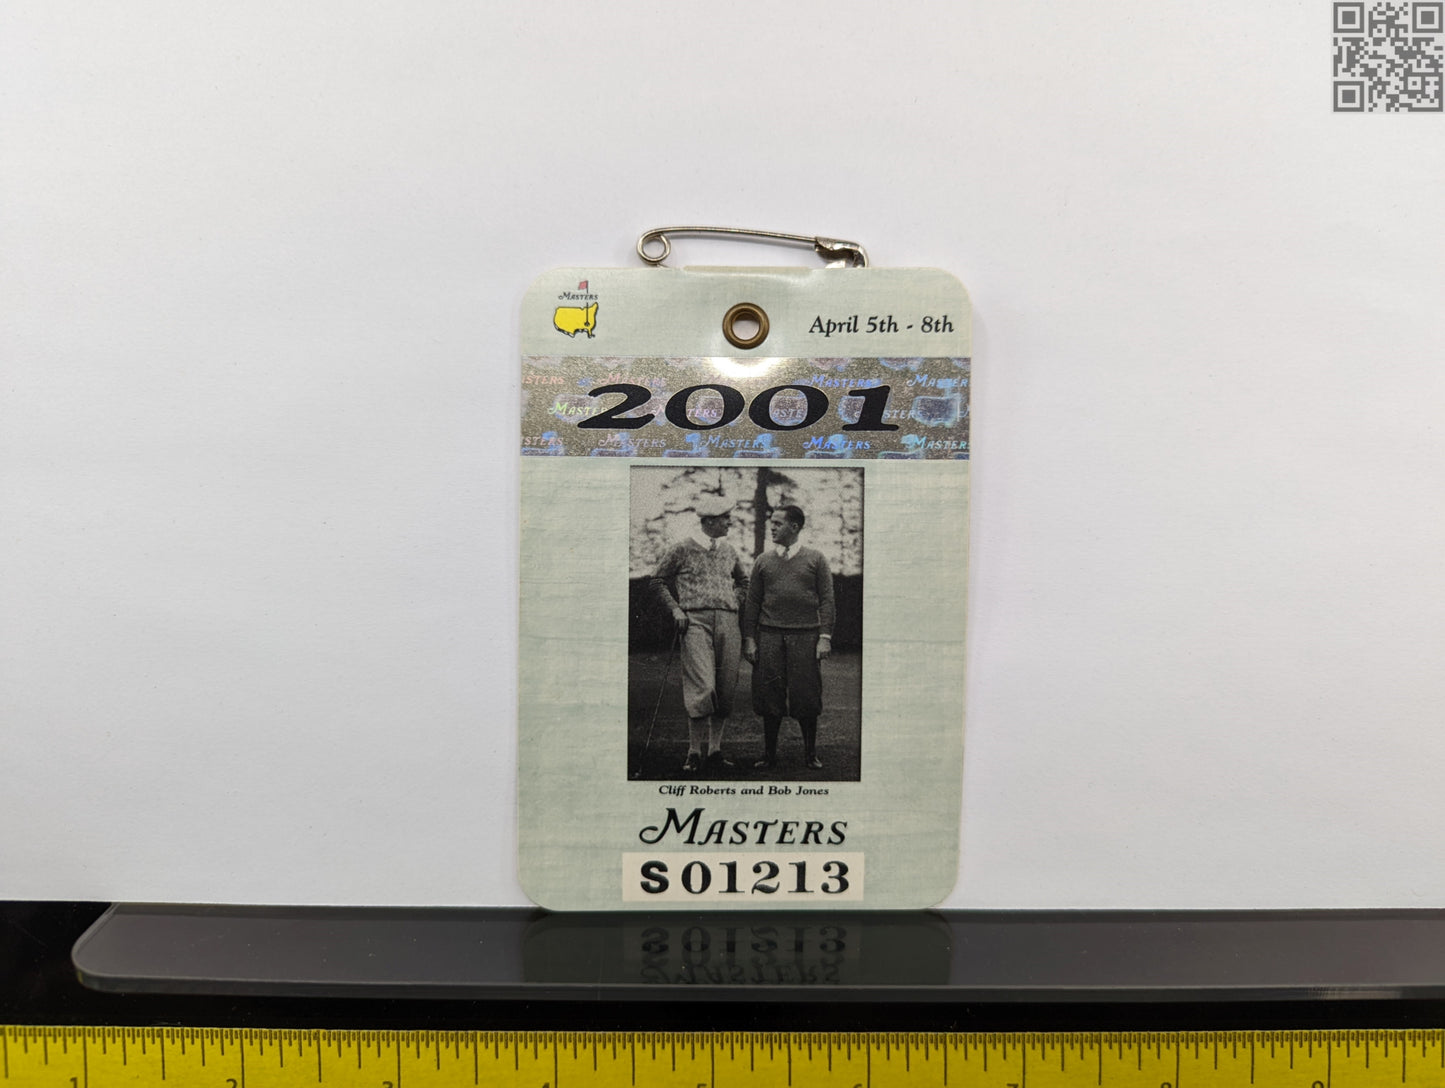 2001 Masters Tournament VIP Series Badge - Augusta National Golf Club - Tiger Woods 2nd Masters Win